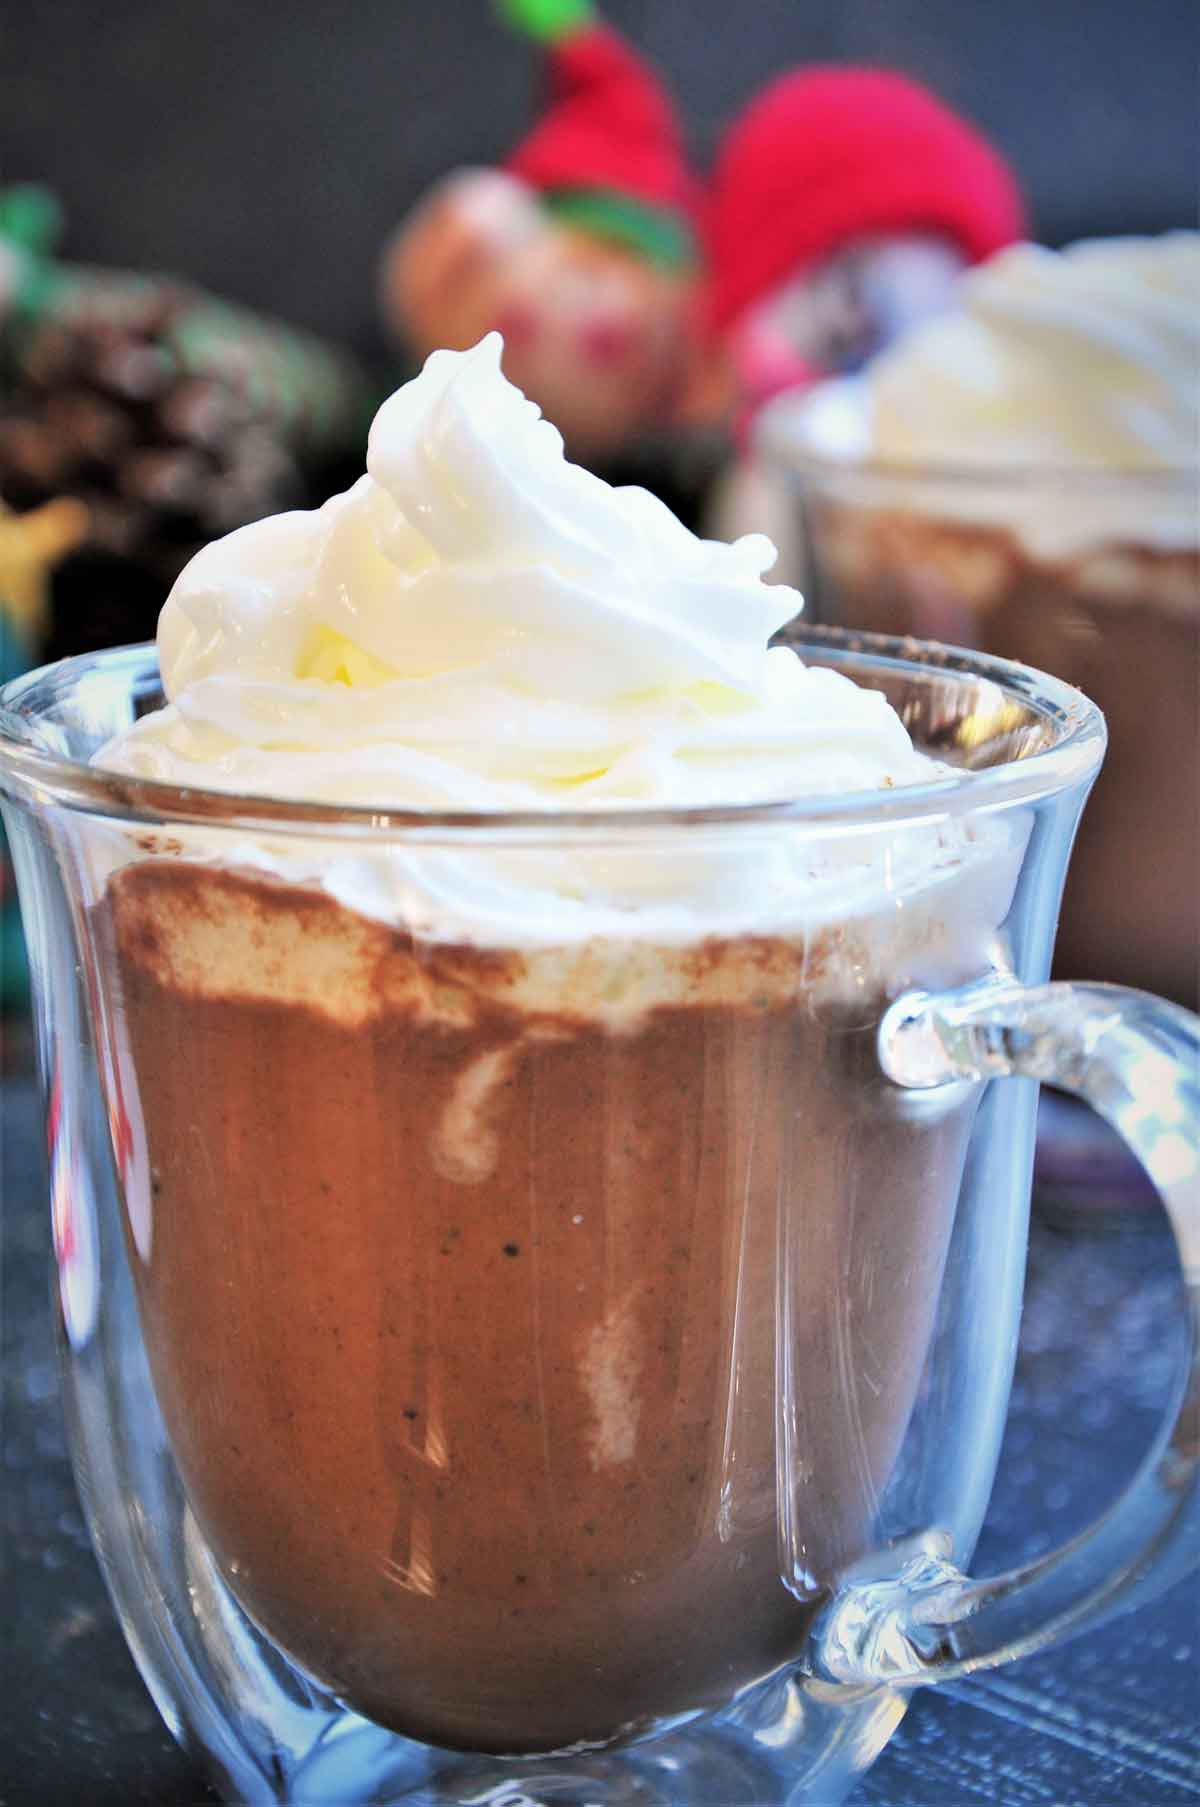 Hot cocoa in a cup topped with whipped cream.